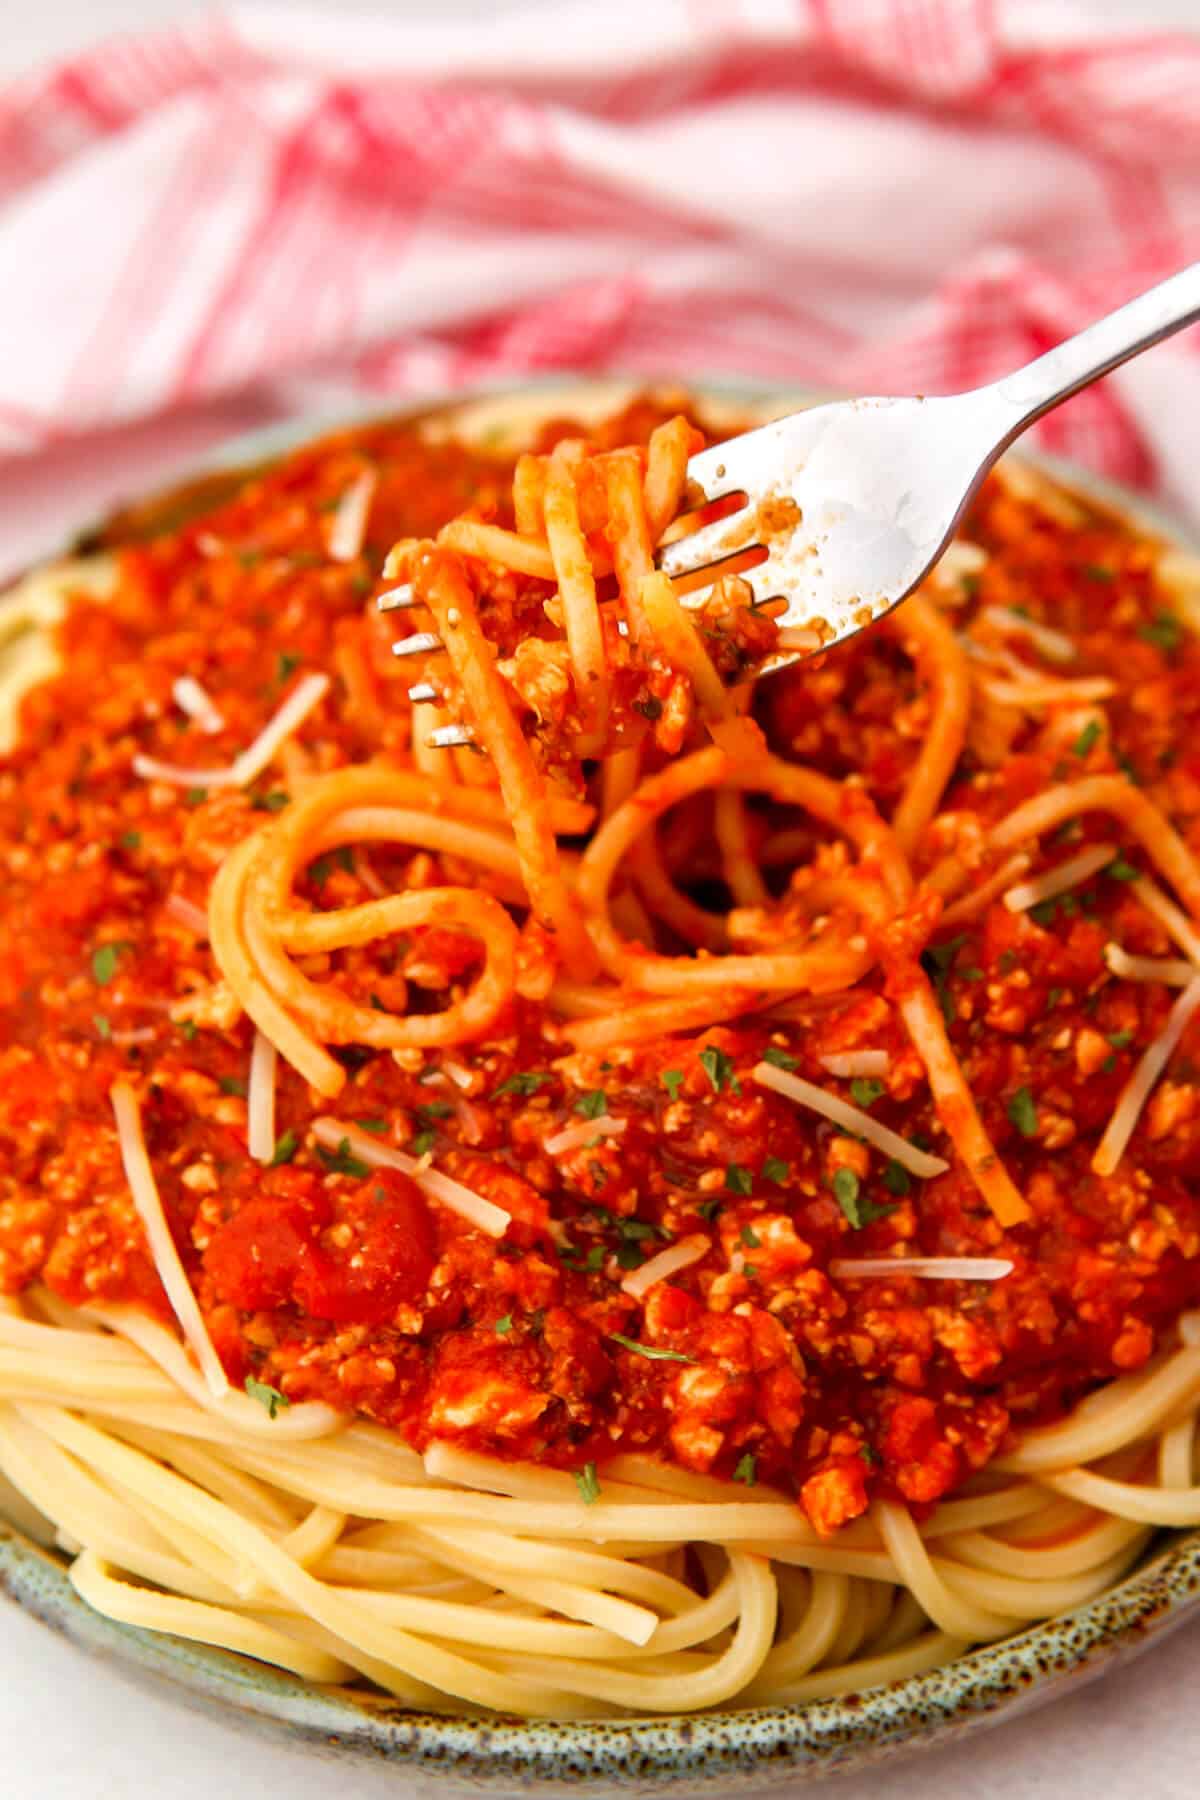 A plate full of spaghetti with tofu Bolognese served on top with someone scooping up a bite.